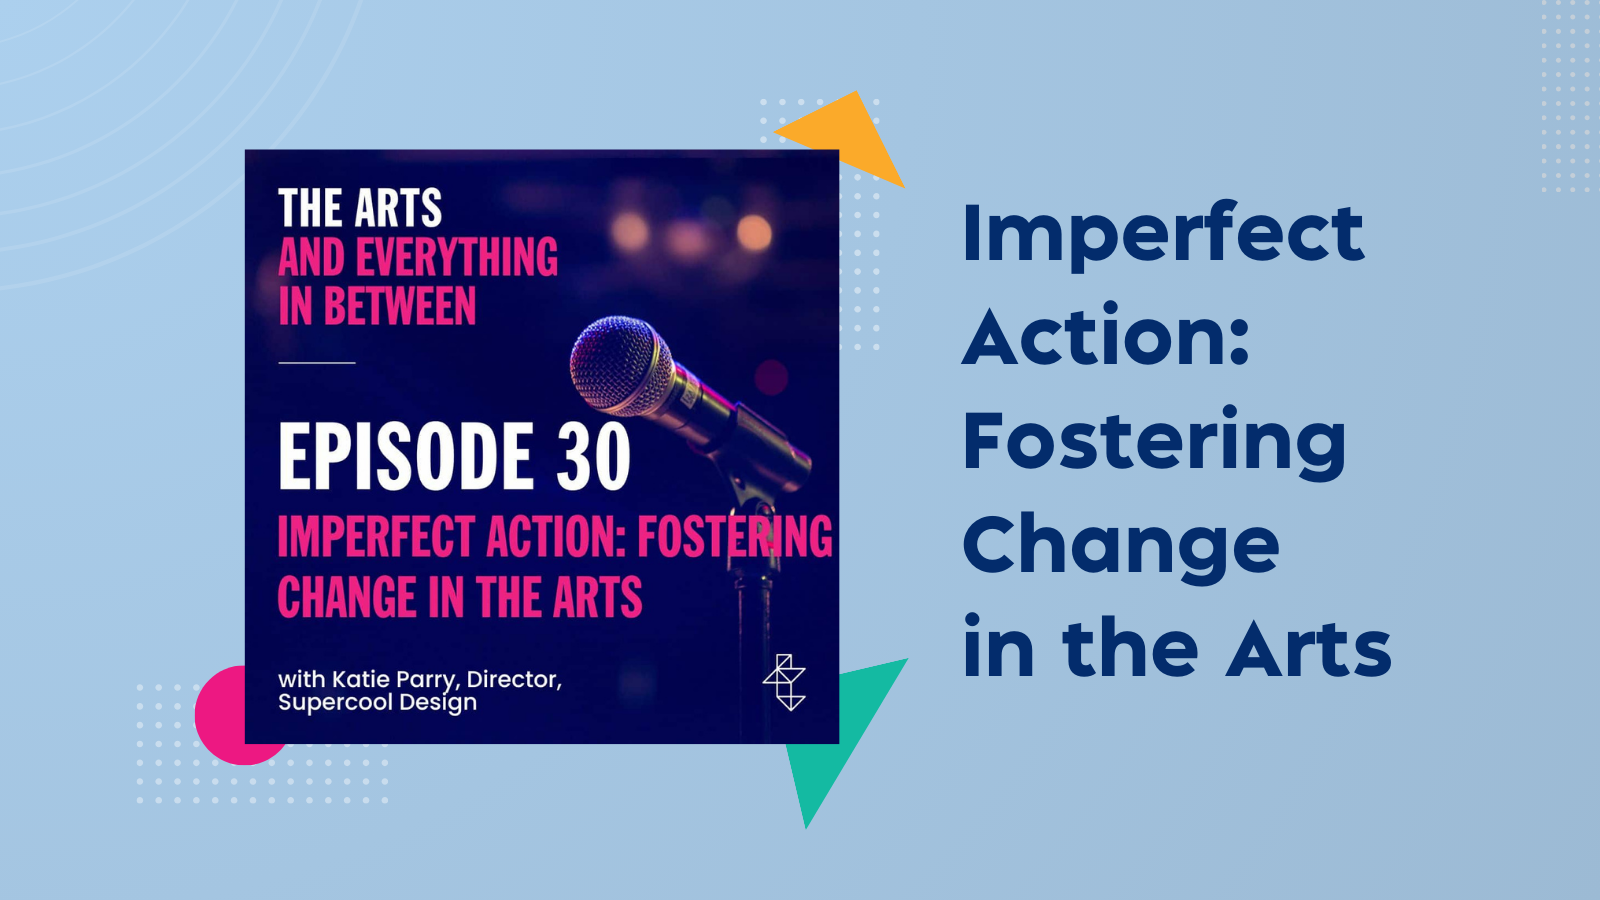 Imperfect Action: Fostering Change in the Arts